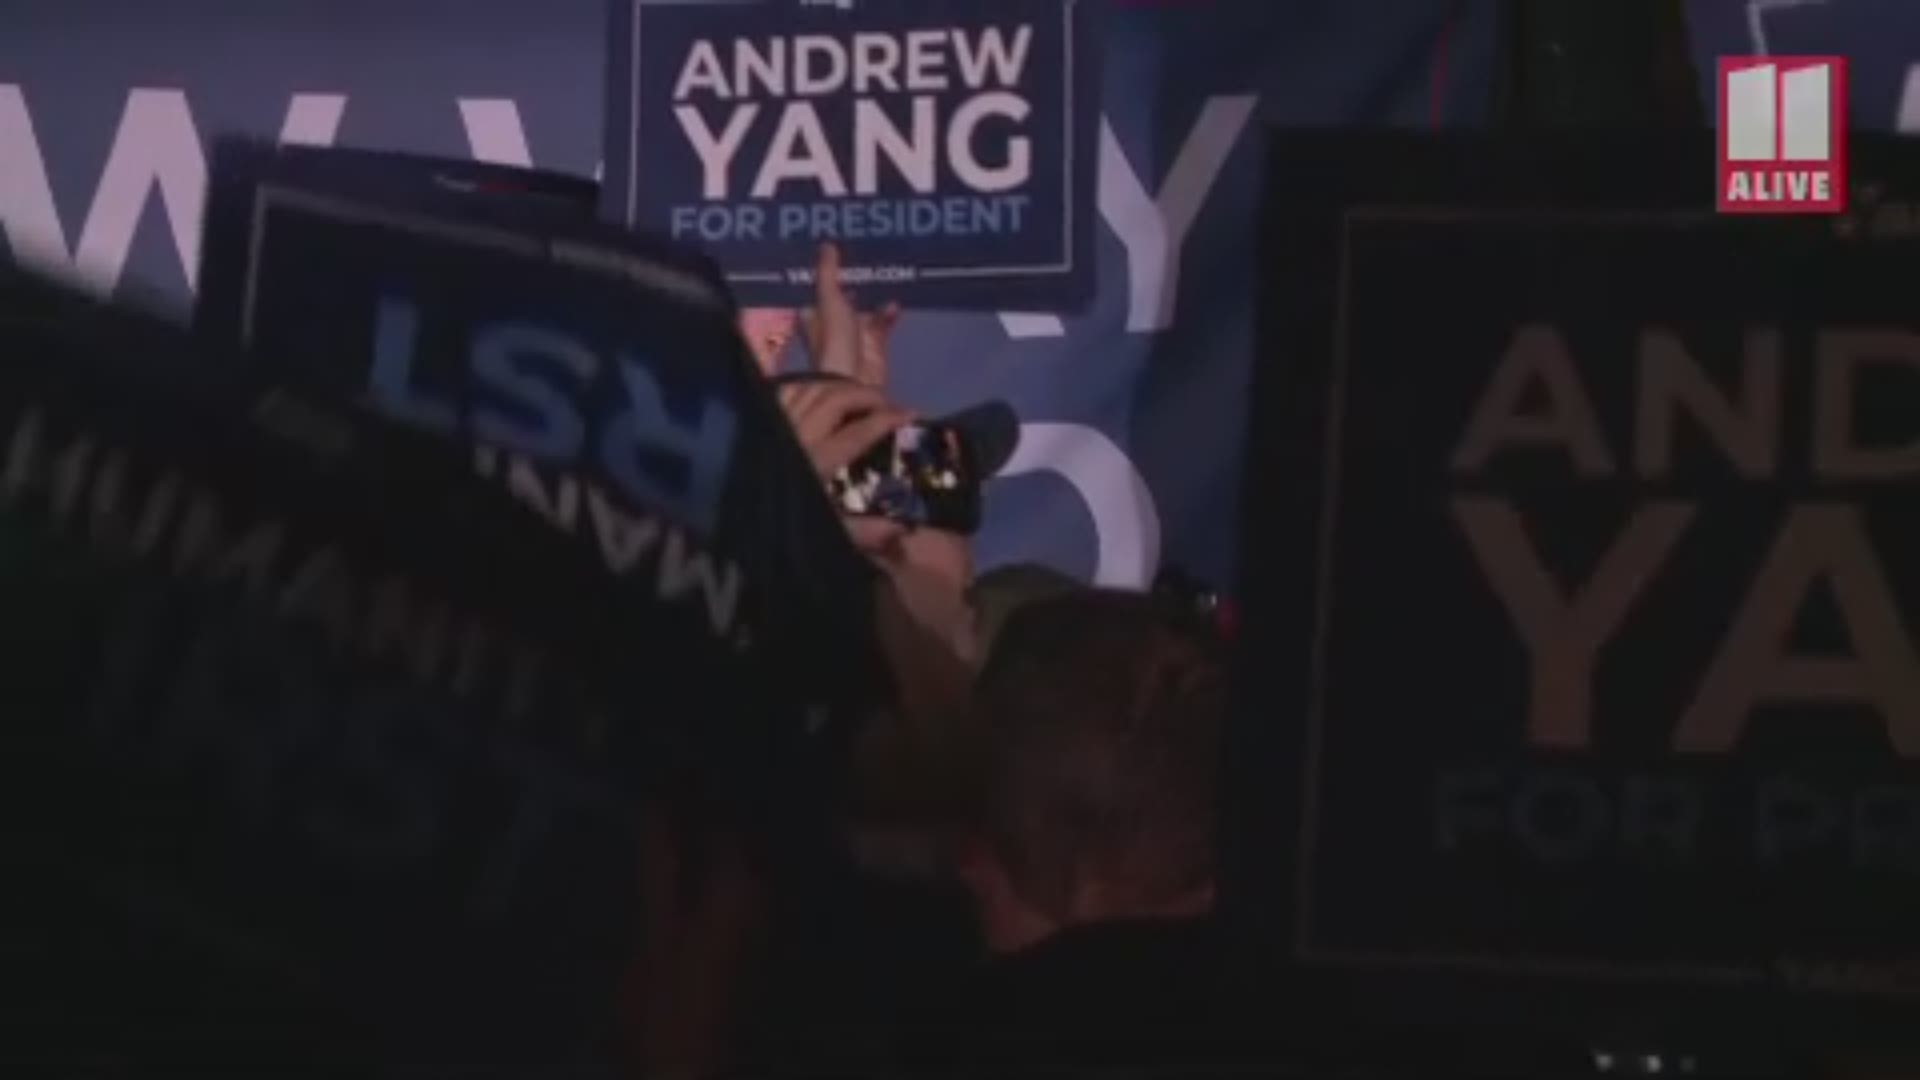 The "Yang Gang" gathered at Georgia Beer Garden on Thursday night for a rally with the Democratic presidential candidate.